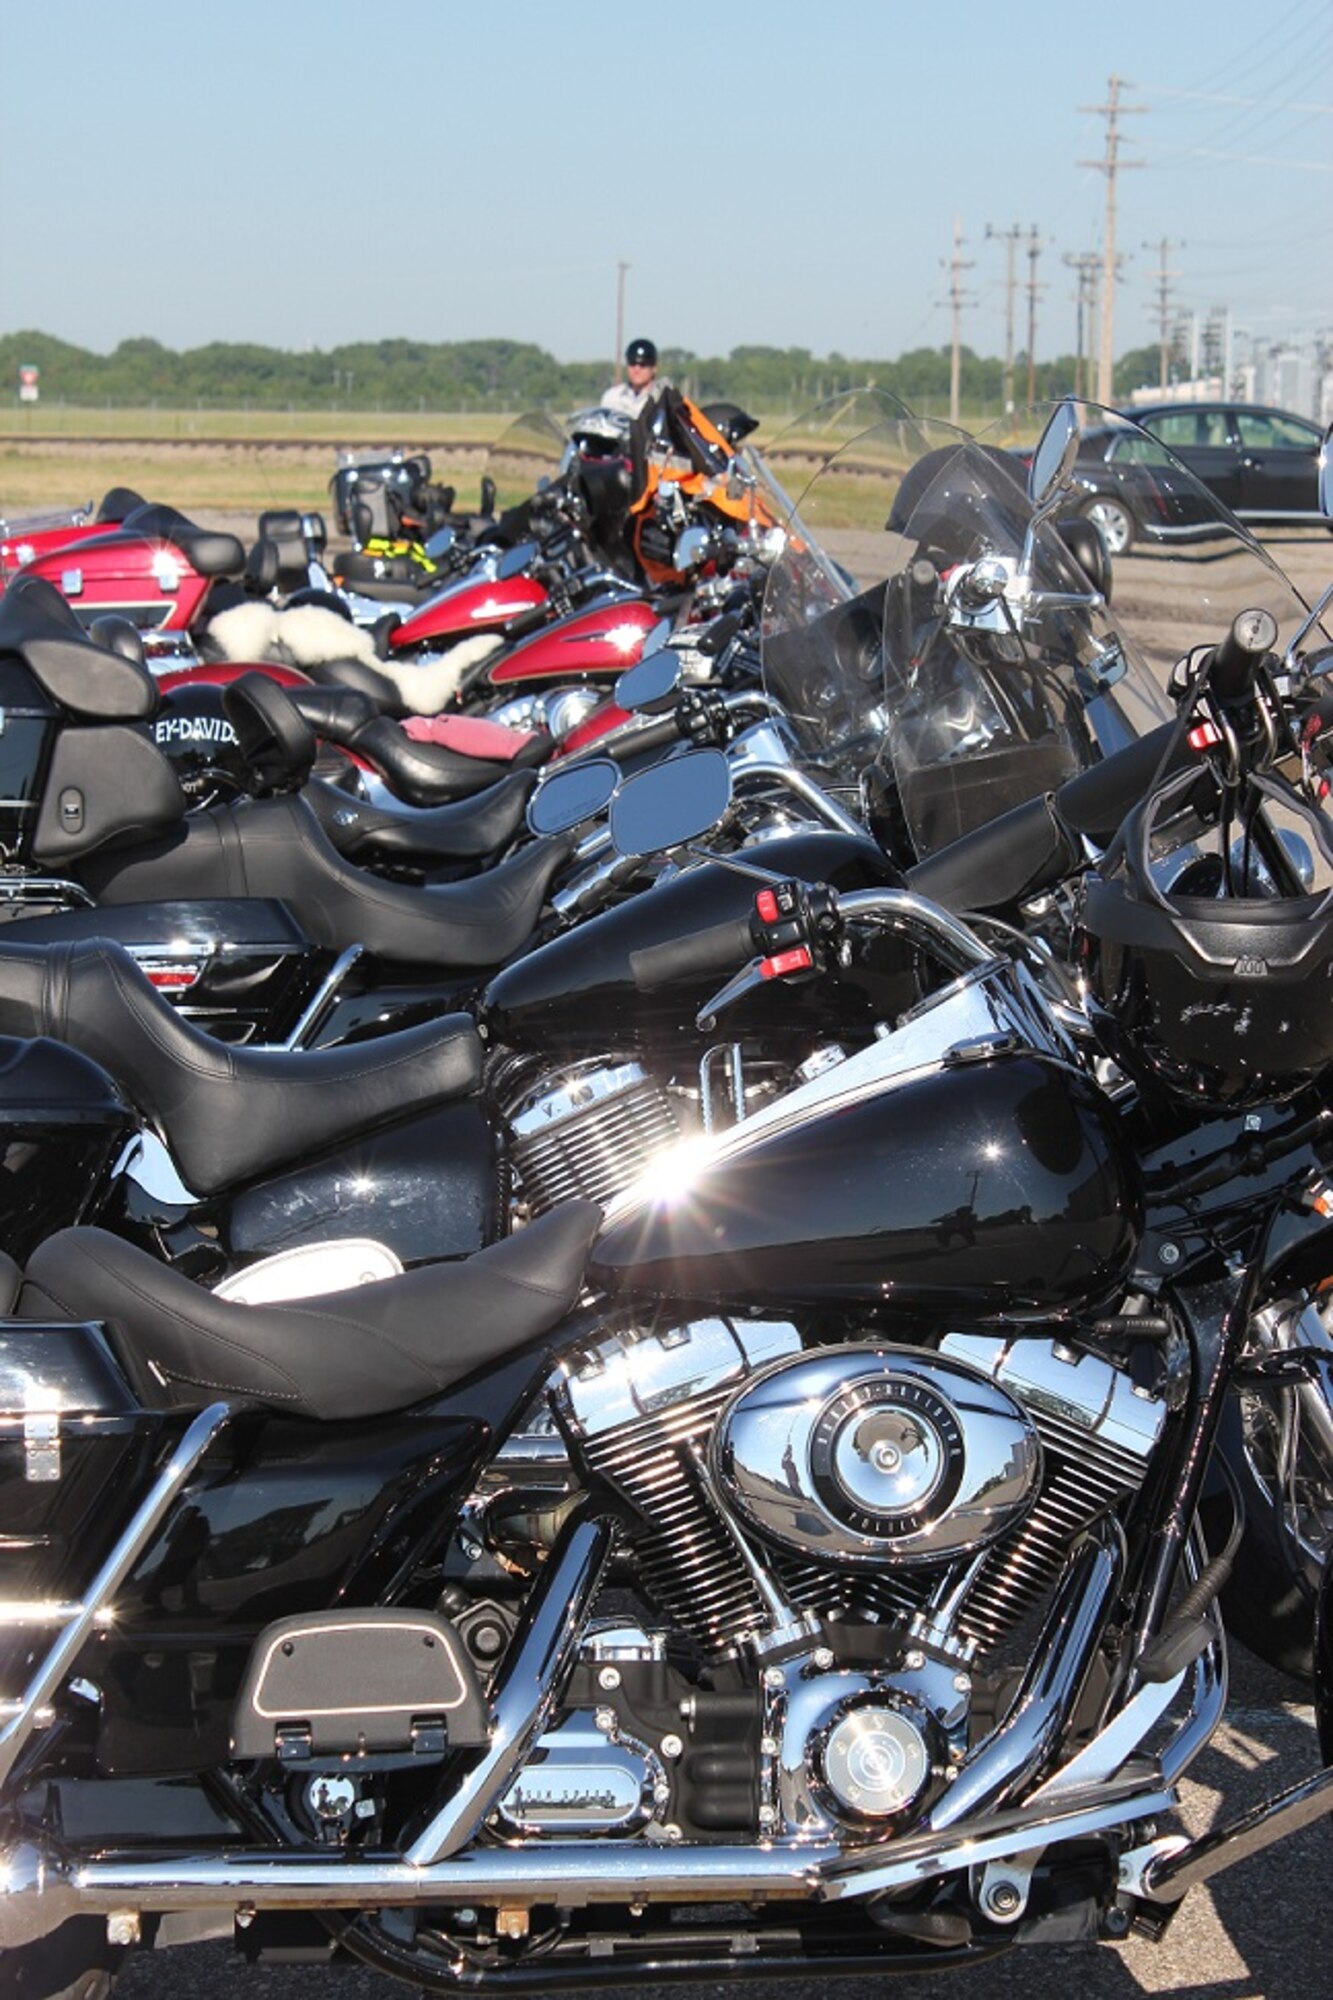 Bikes lined up for a Motorcycle Mentorship Poker Run hosted by the 127th Wing Safety Office and the Detroit Arsenal Safety Office, at Selfridge Air National Guard Base, Mich., on July 30. The motorcycle rally had a focus on rider mentorship and safety. Twenty-six bikes and about 40 riders/passengers participated. (USAF photo by Capt. Penny Carroll)